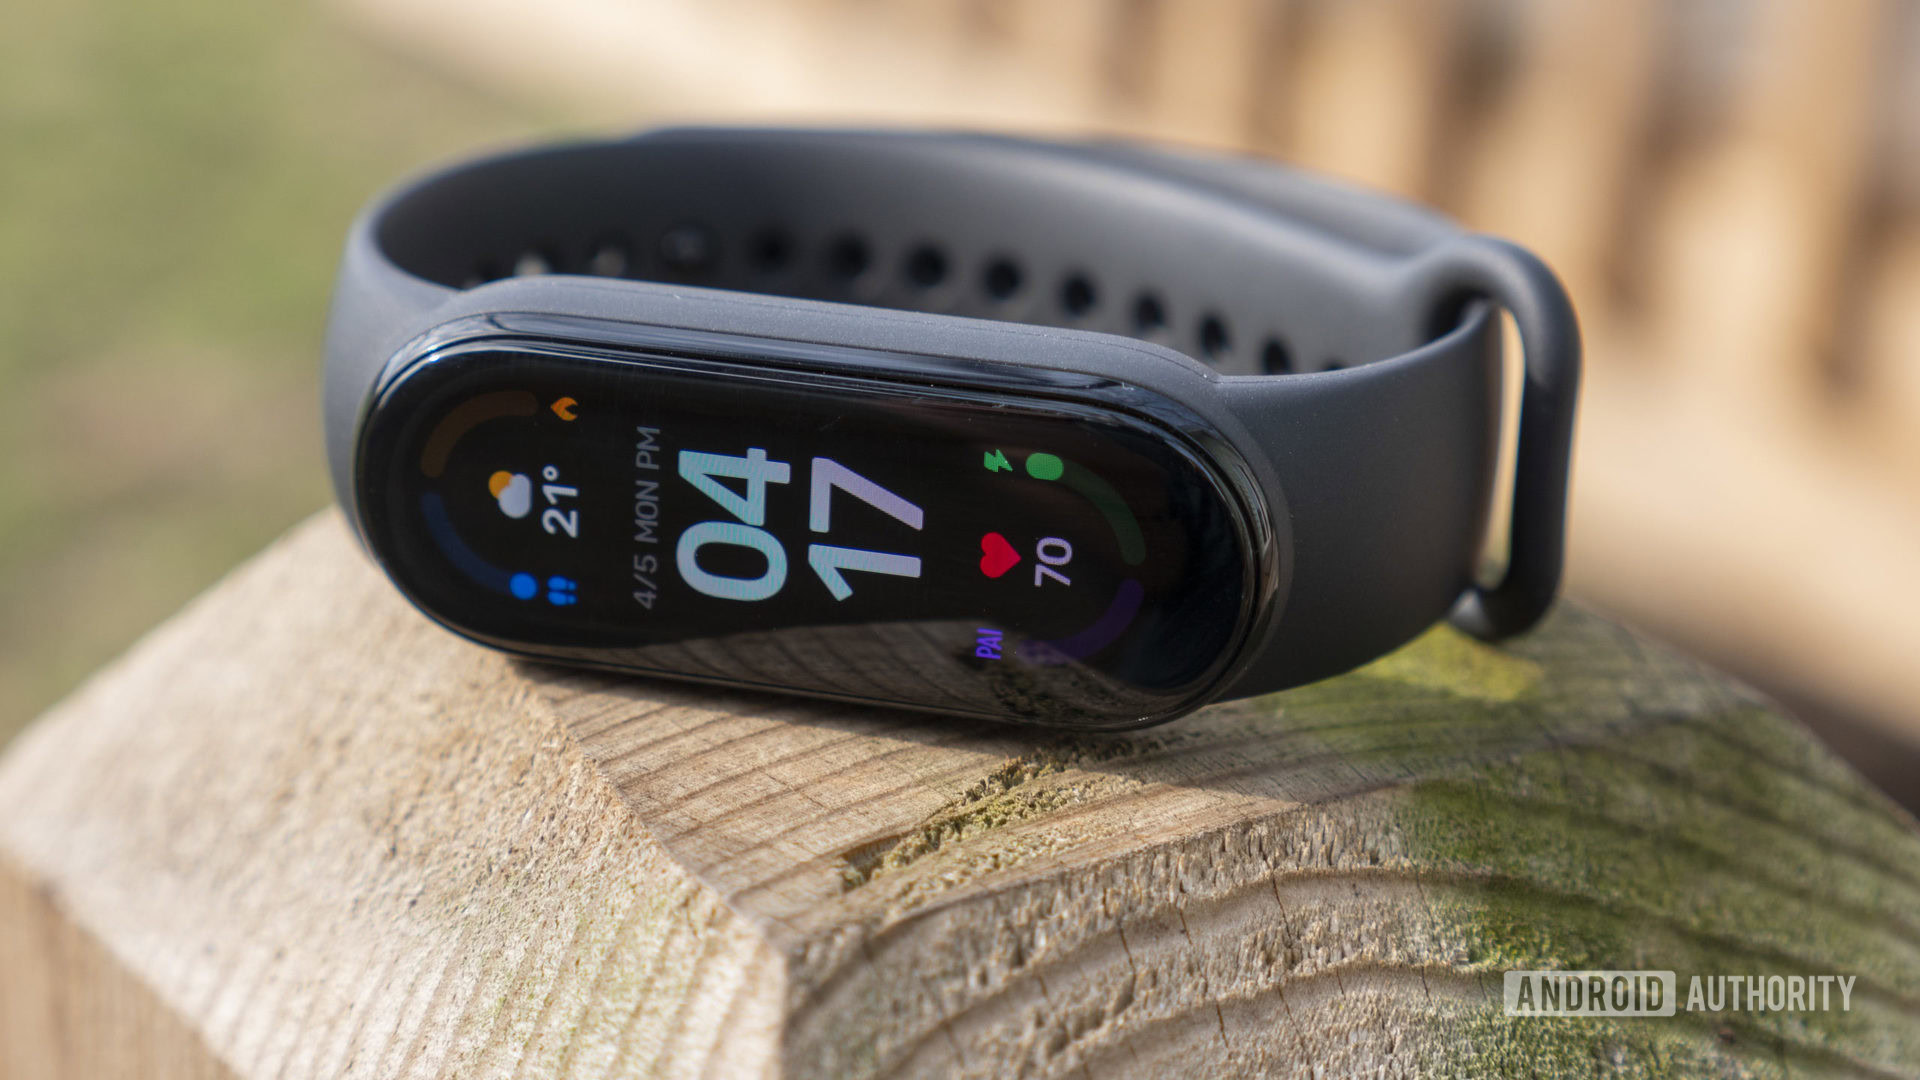 Huawei band 6 pro review: The budget fitness tracker with over 90